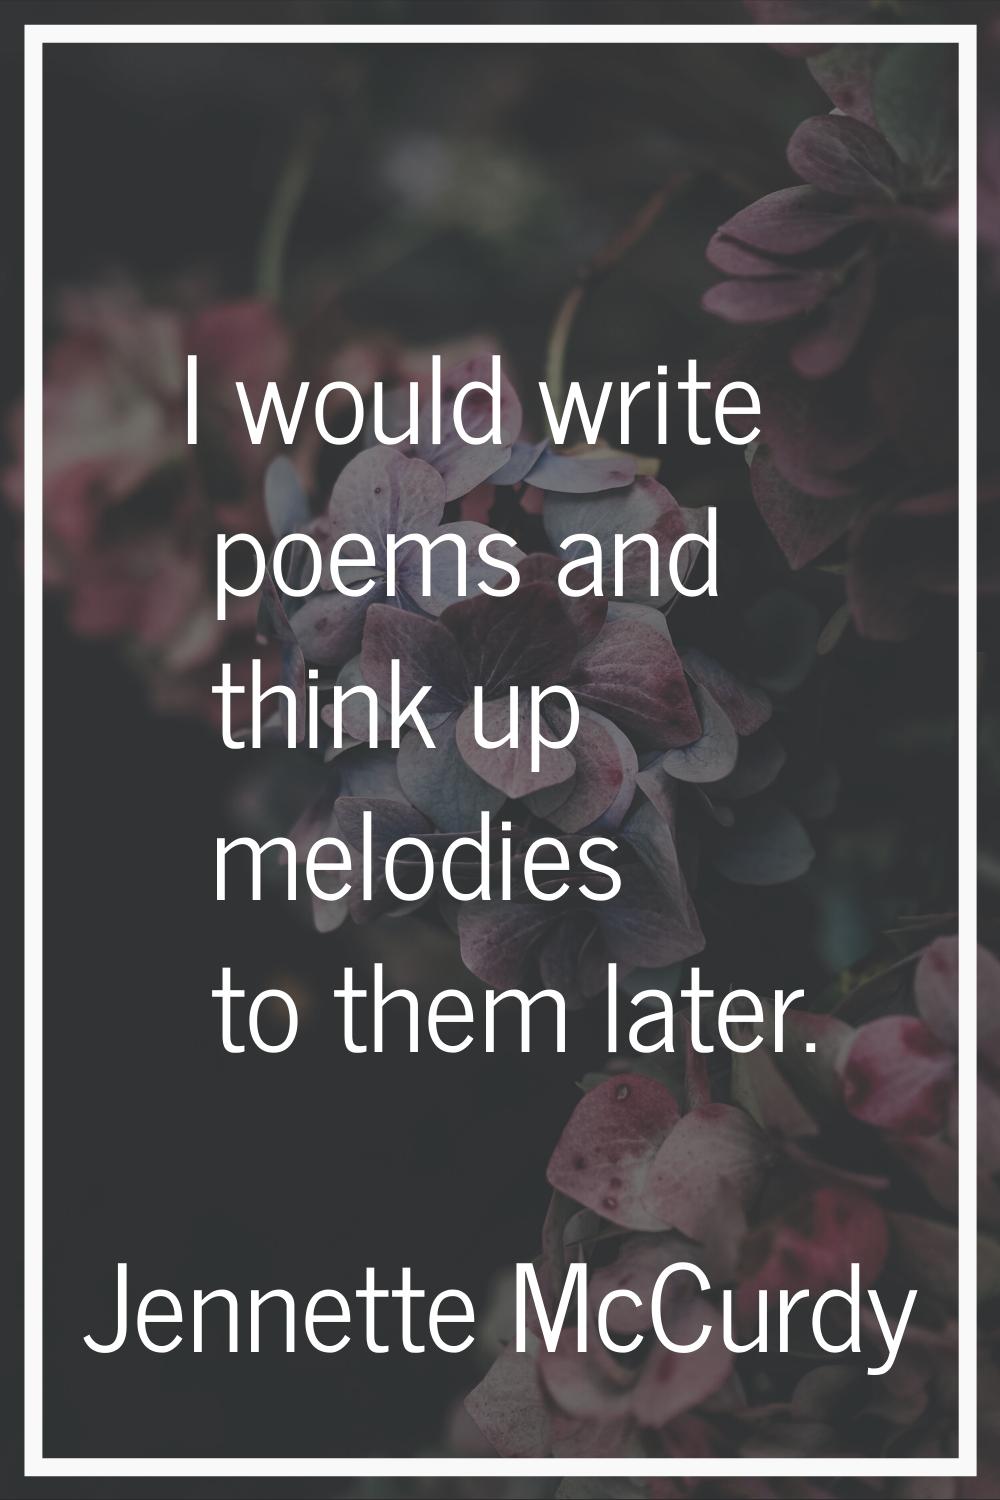 I would write poems and think up melodies to them later.